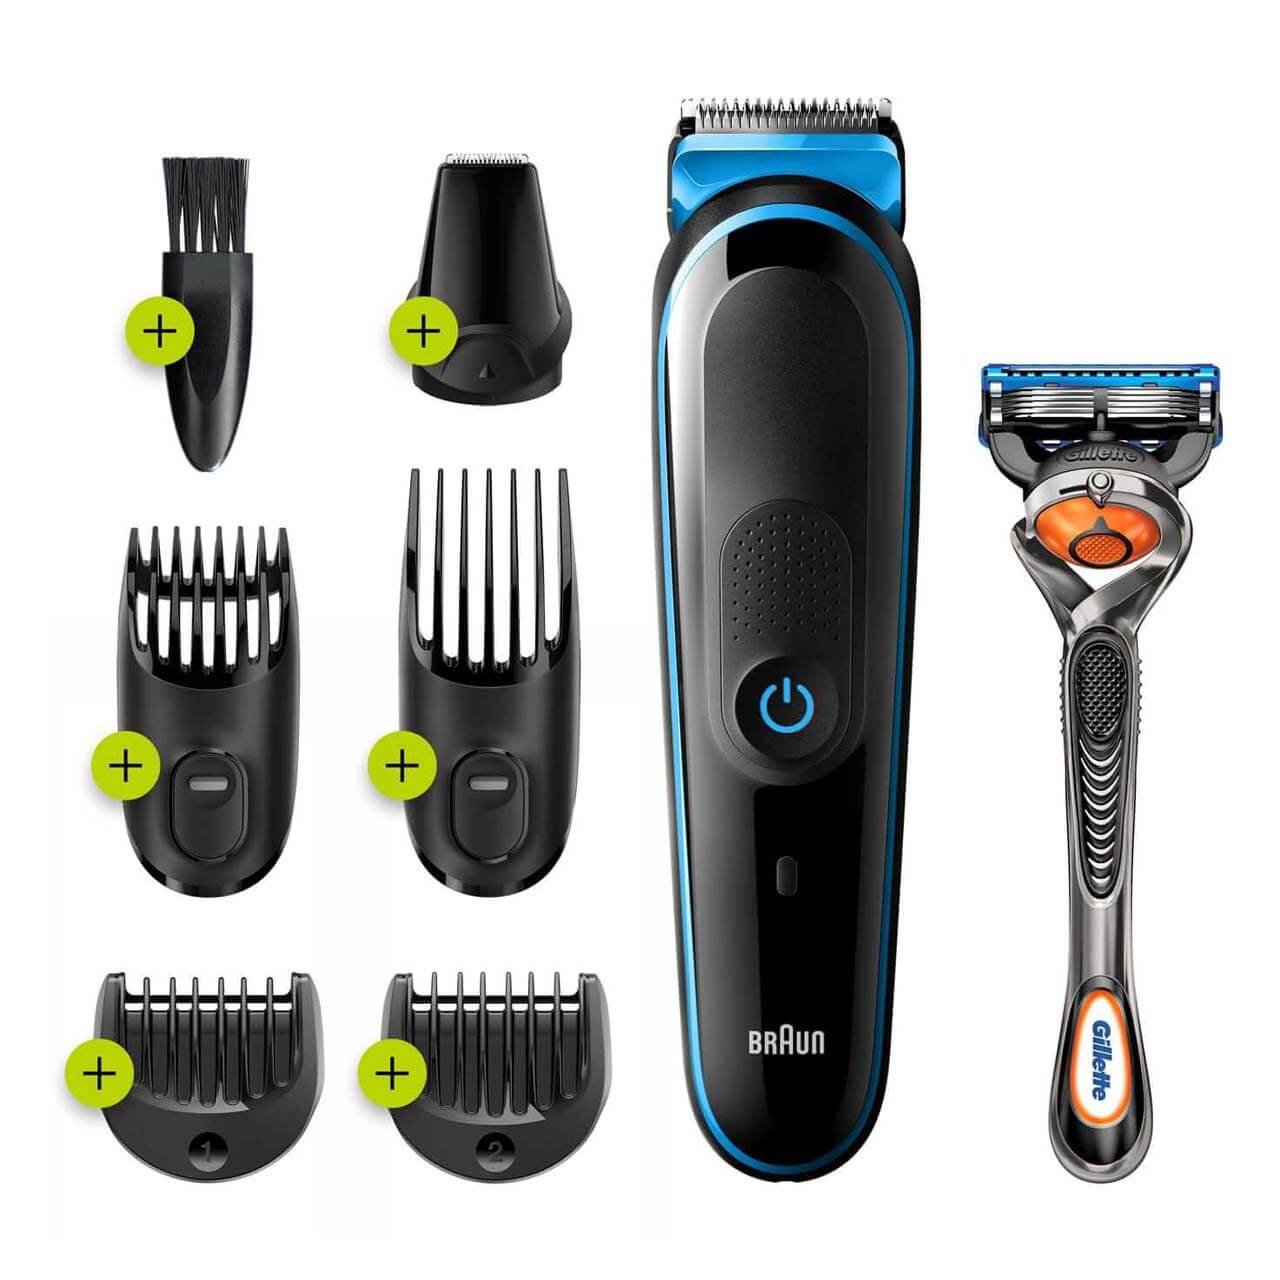 All-in-One trimmer 5 for Face, Hair, and Body, Black/Blue 7-in-1 styling